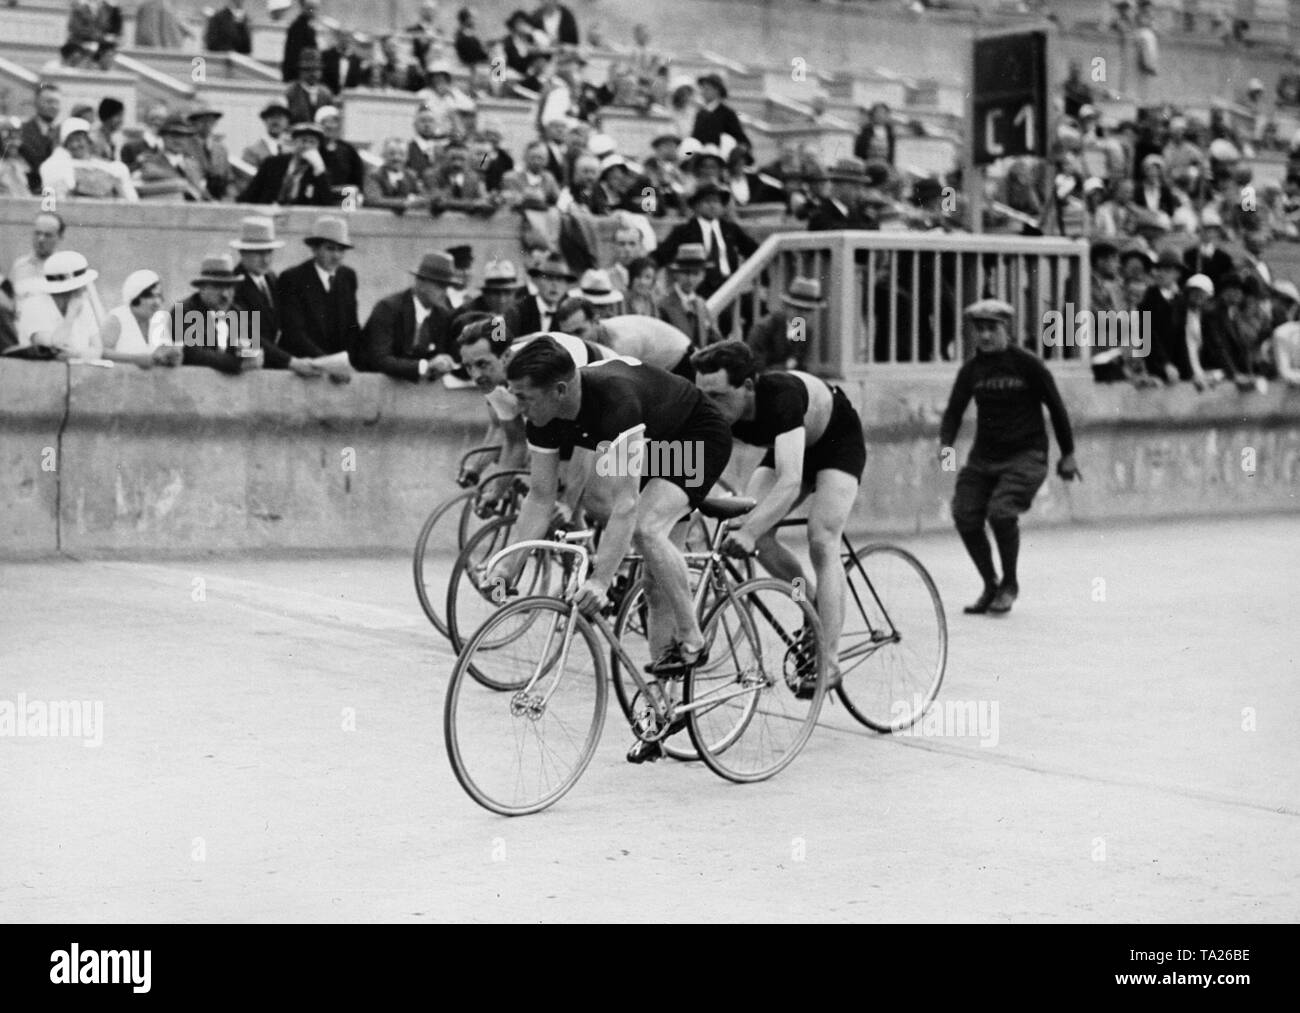 Four track cyclists in a race at Grunewaldstadion on July 24, 1932, as part of the Arcona Prize. Stock Photo